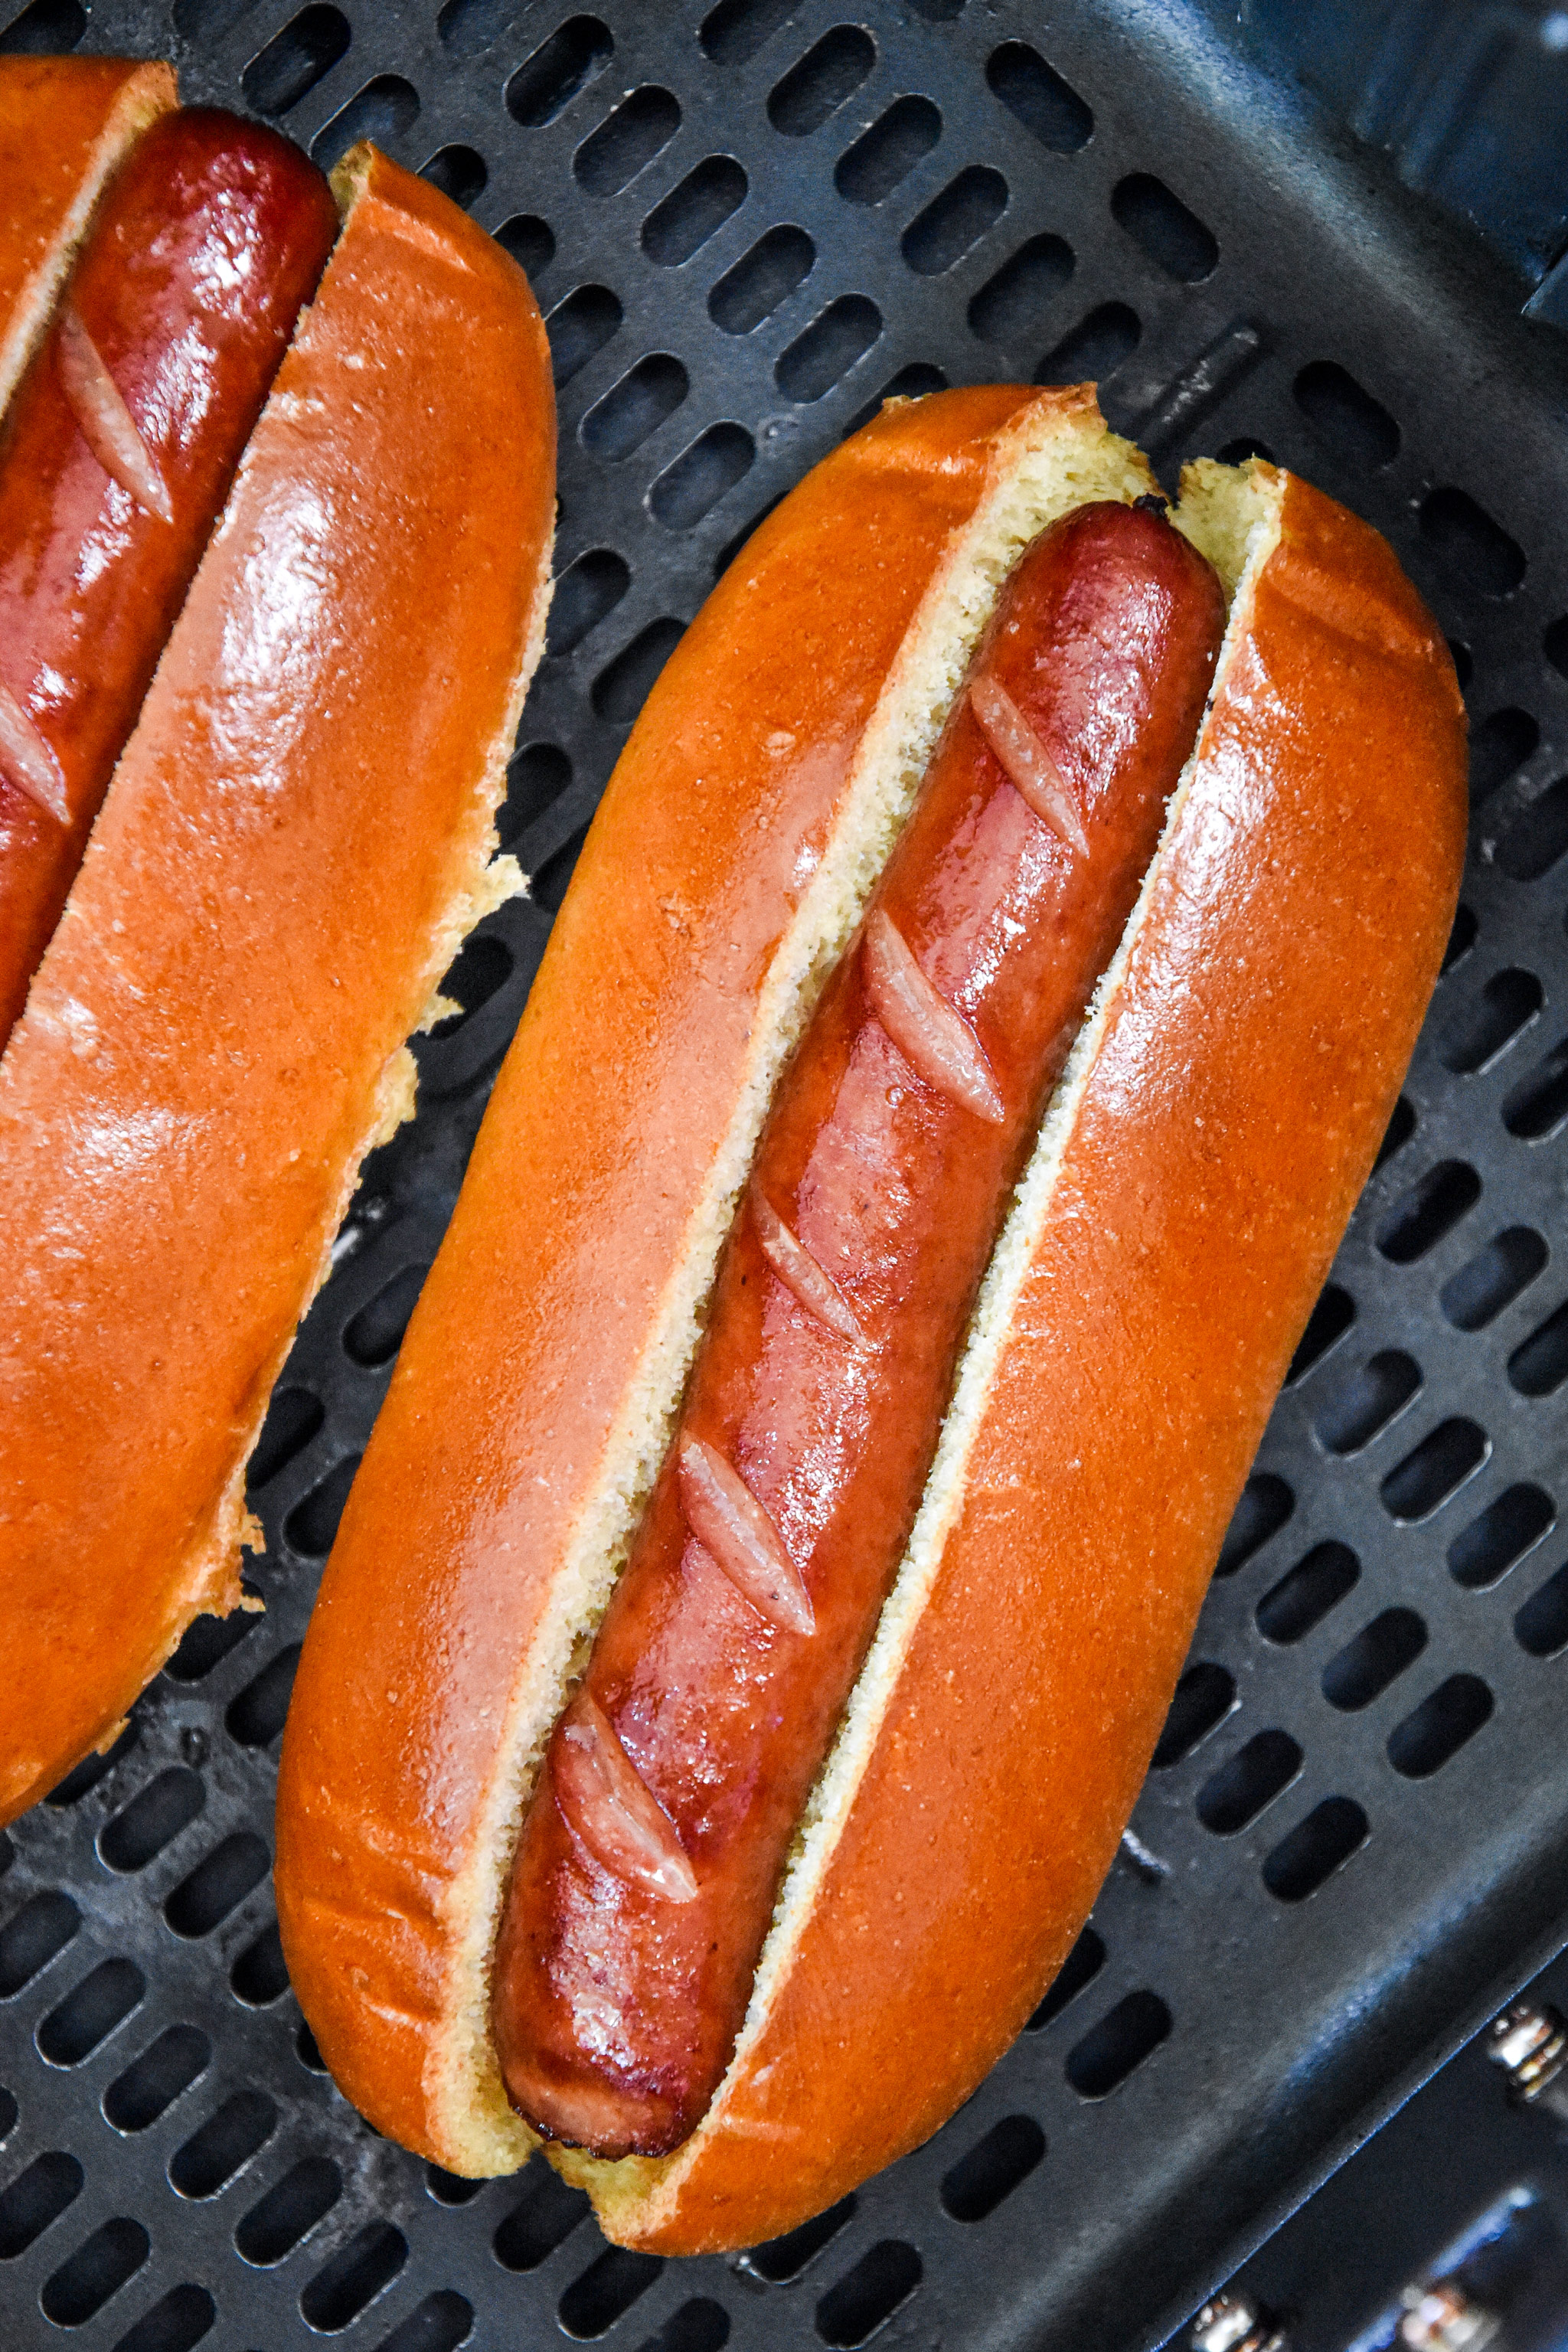 toasted buns and cooked hot dogs in the air fryer basket.